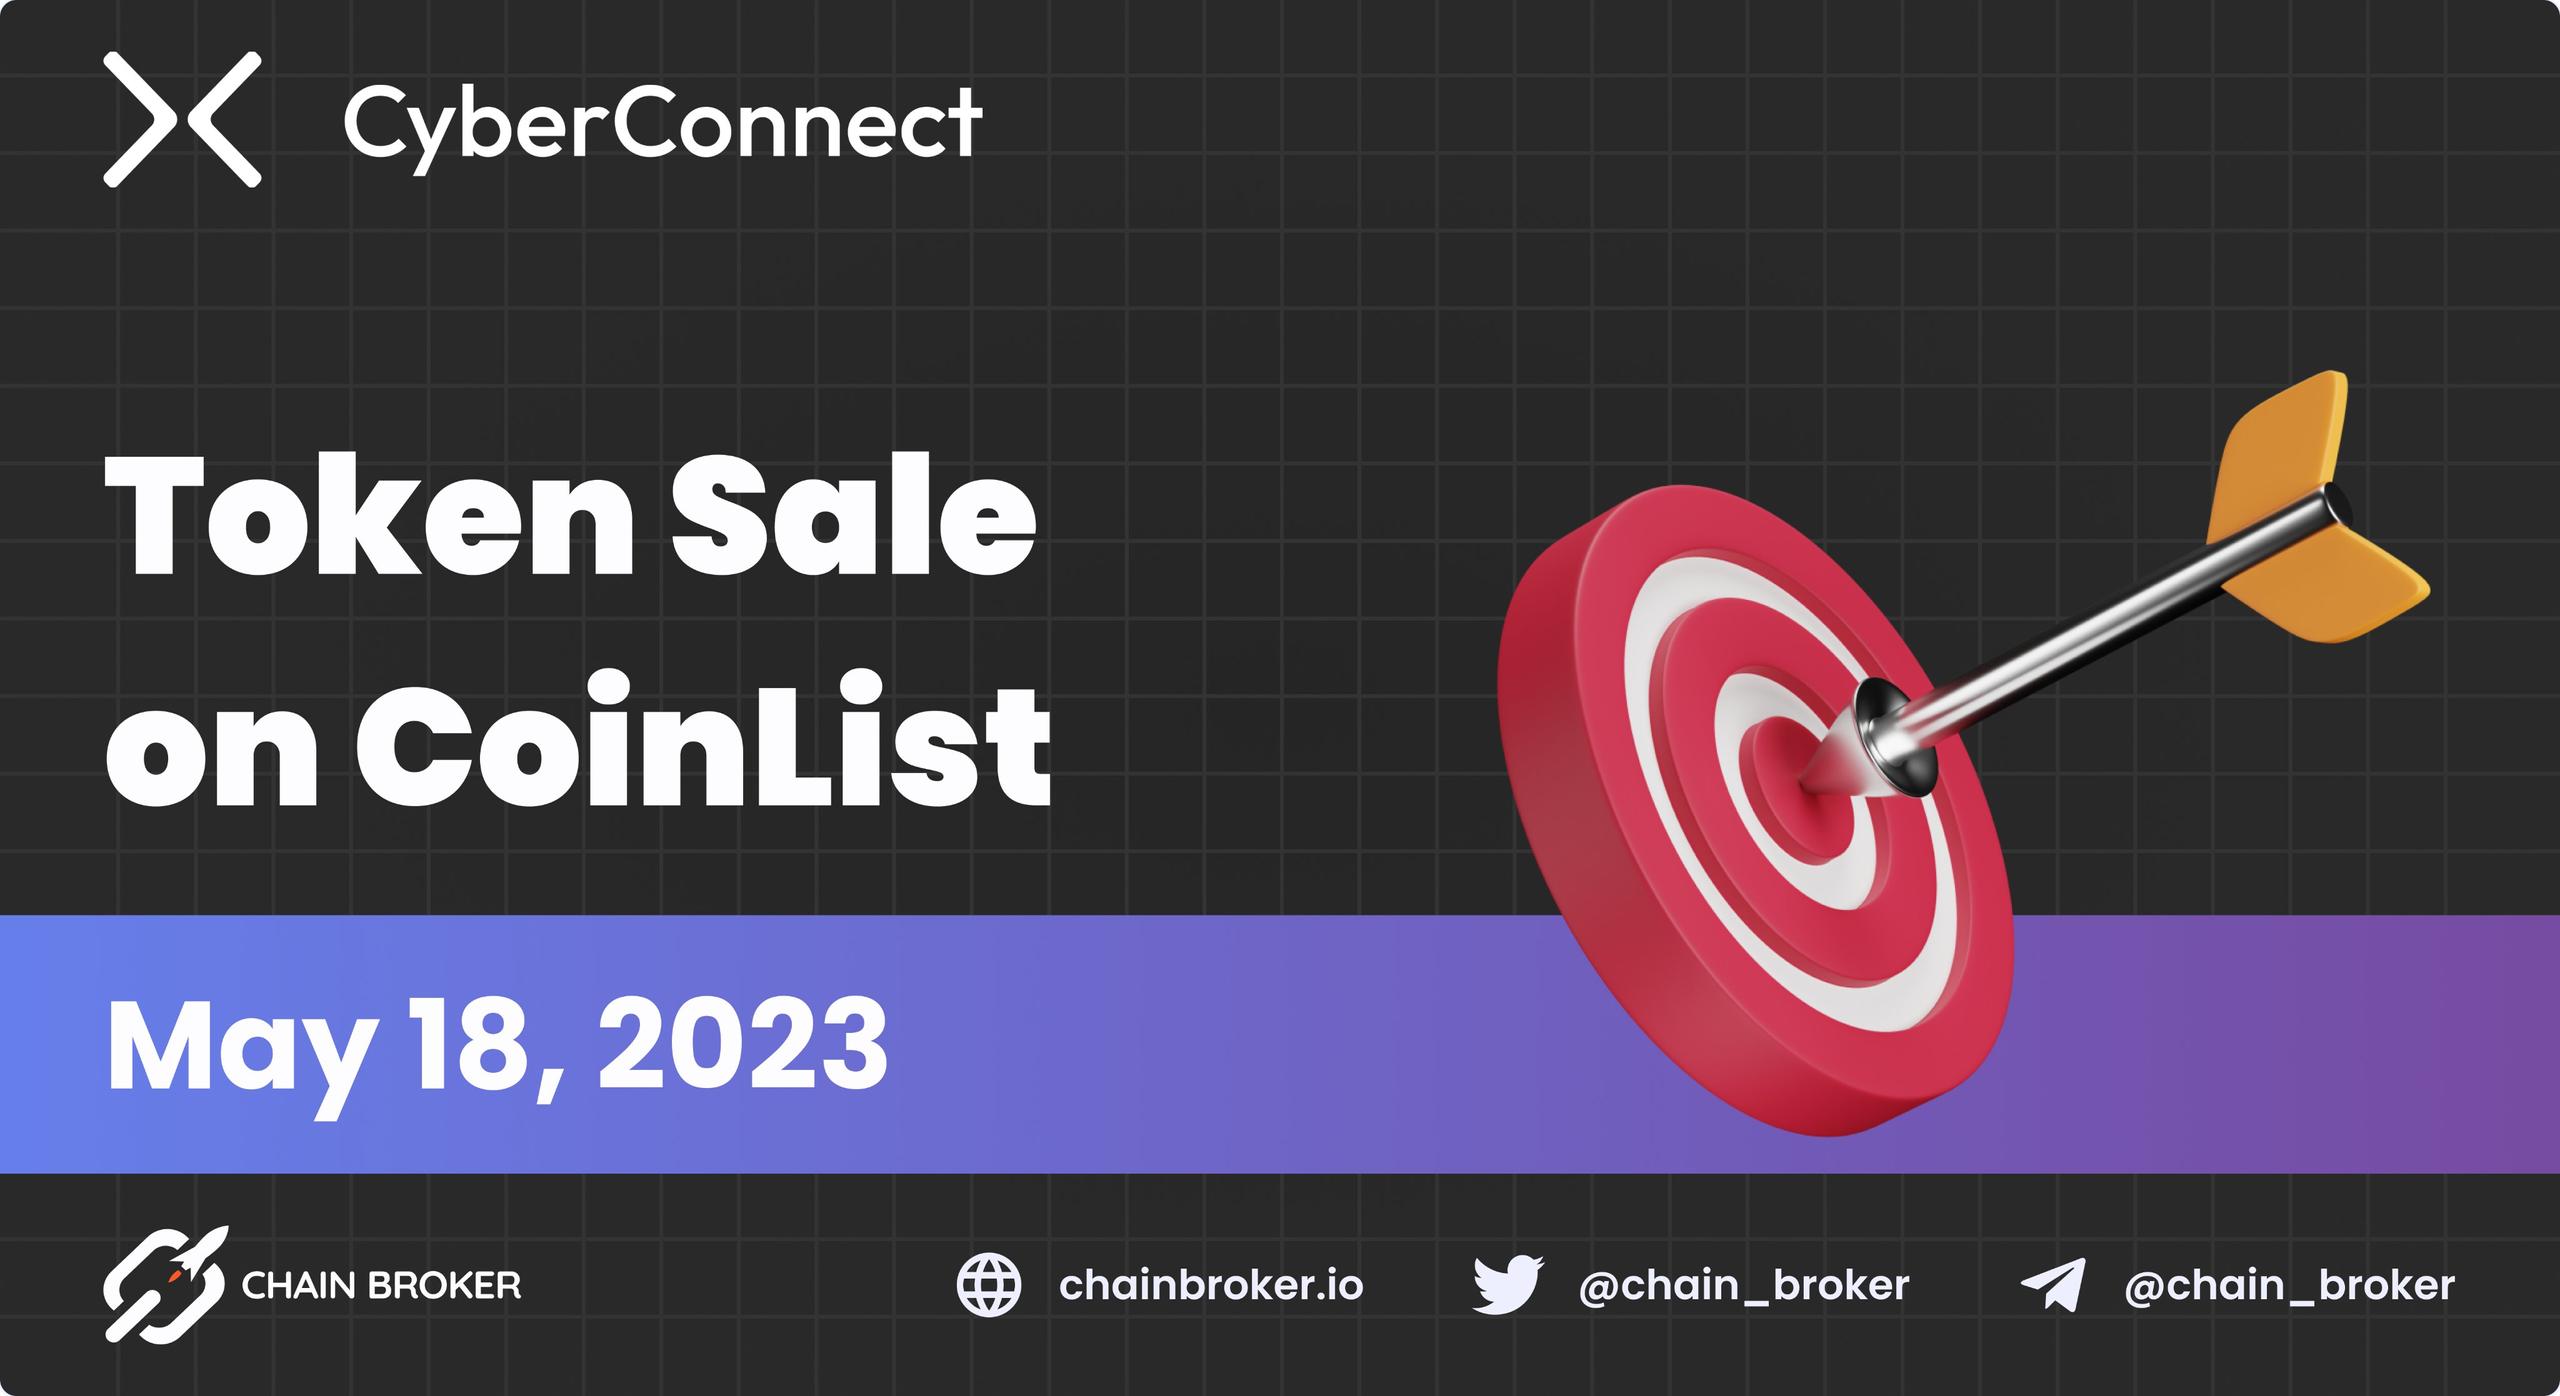 CyberConnect to Conduct Token Sale on Coinlist